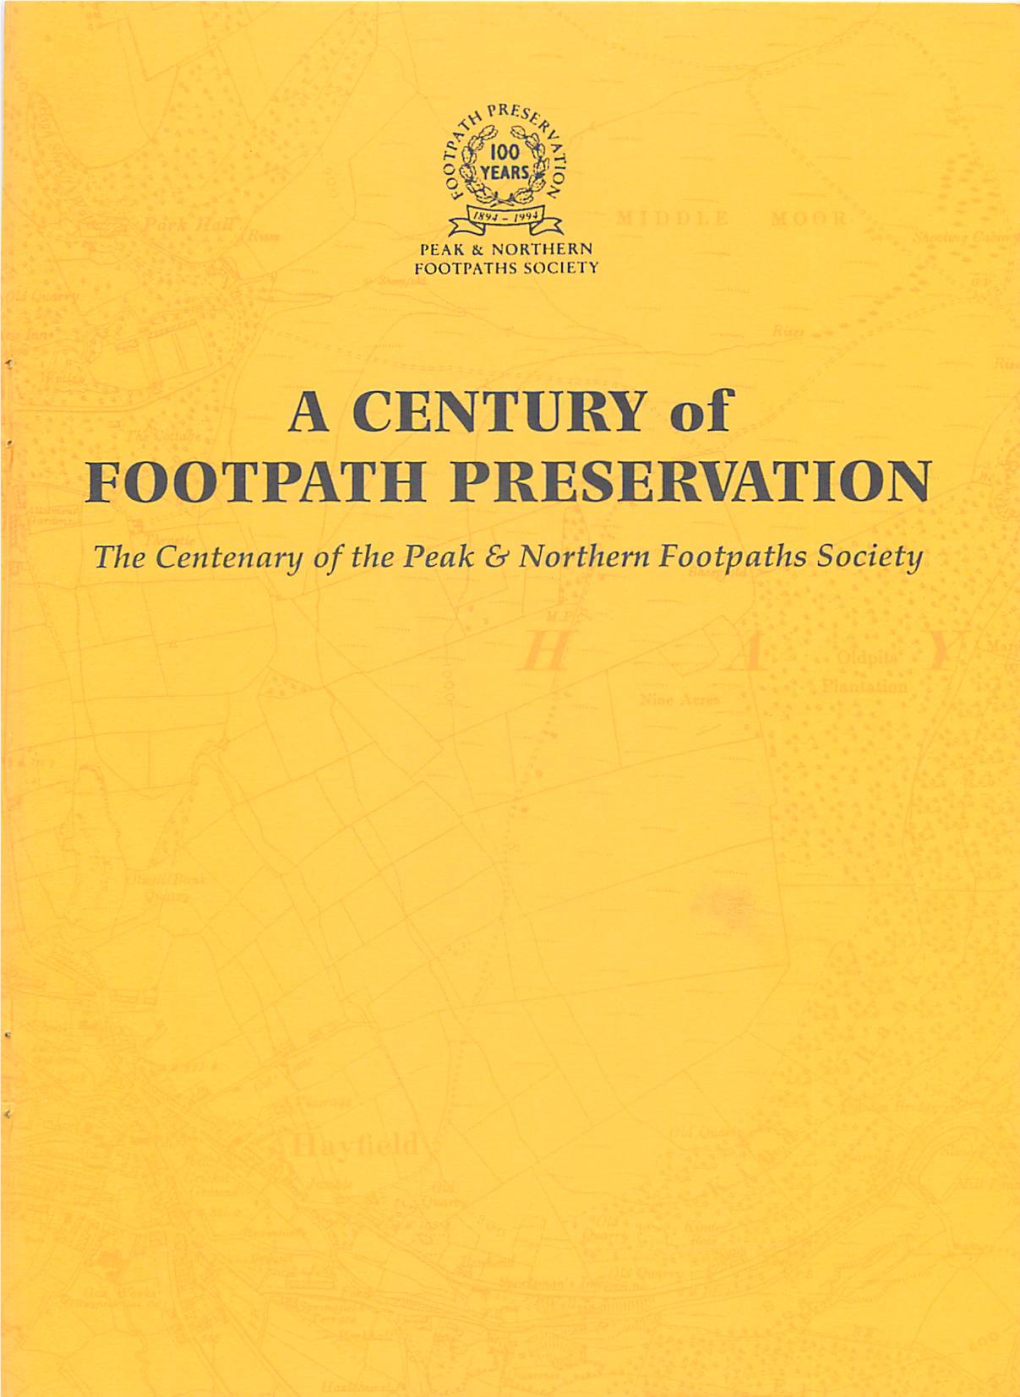 A CENTURY of FOOTPATH PRESERVATION